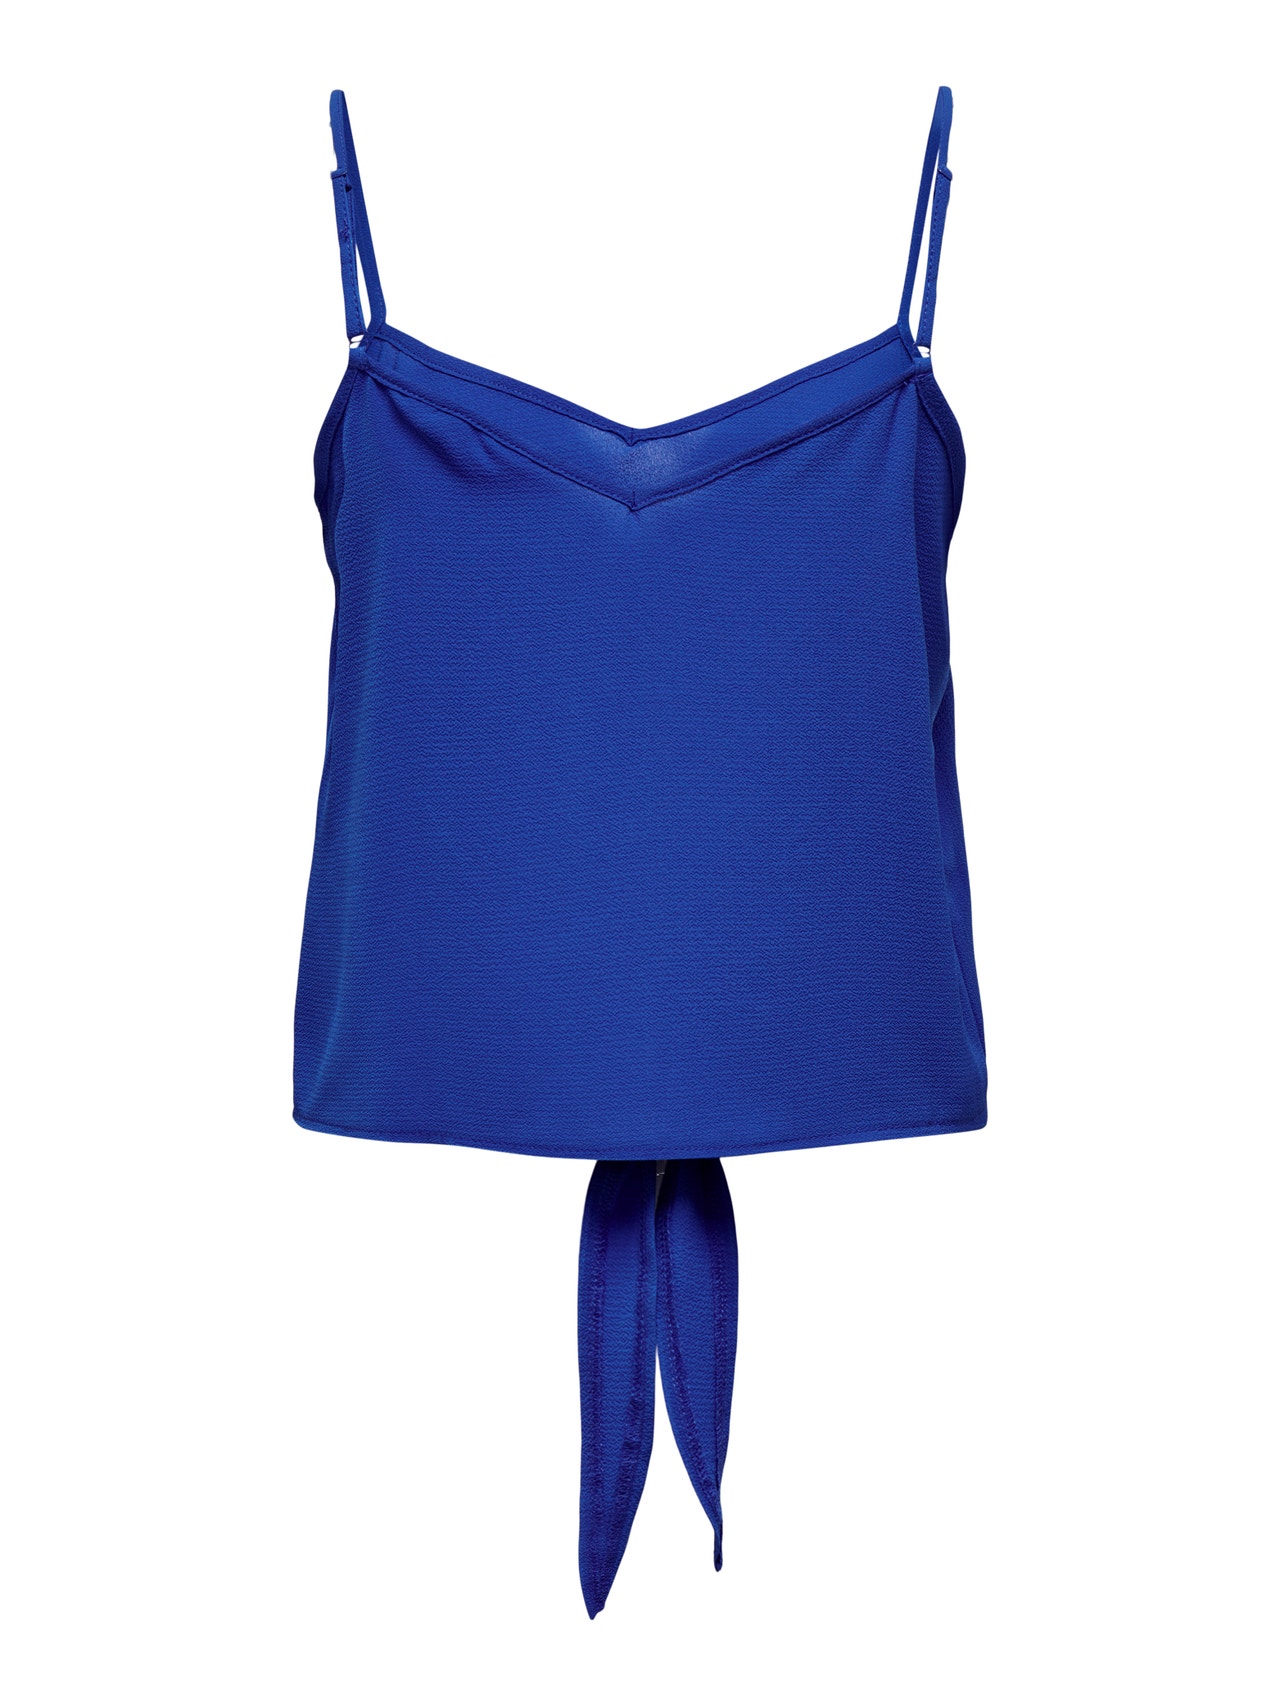 ONLY Knot detailed Top -Dazzling Blue - 15271357